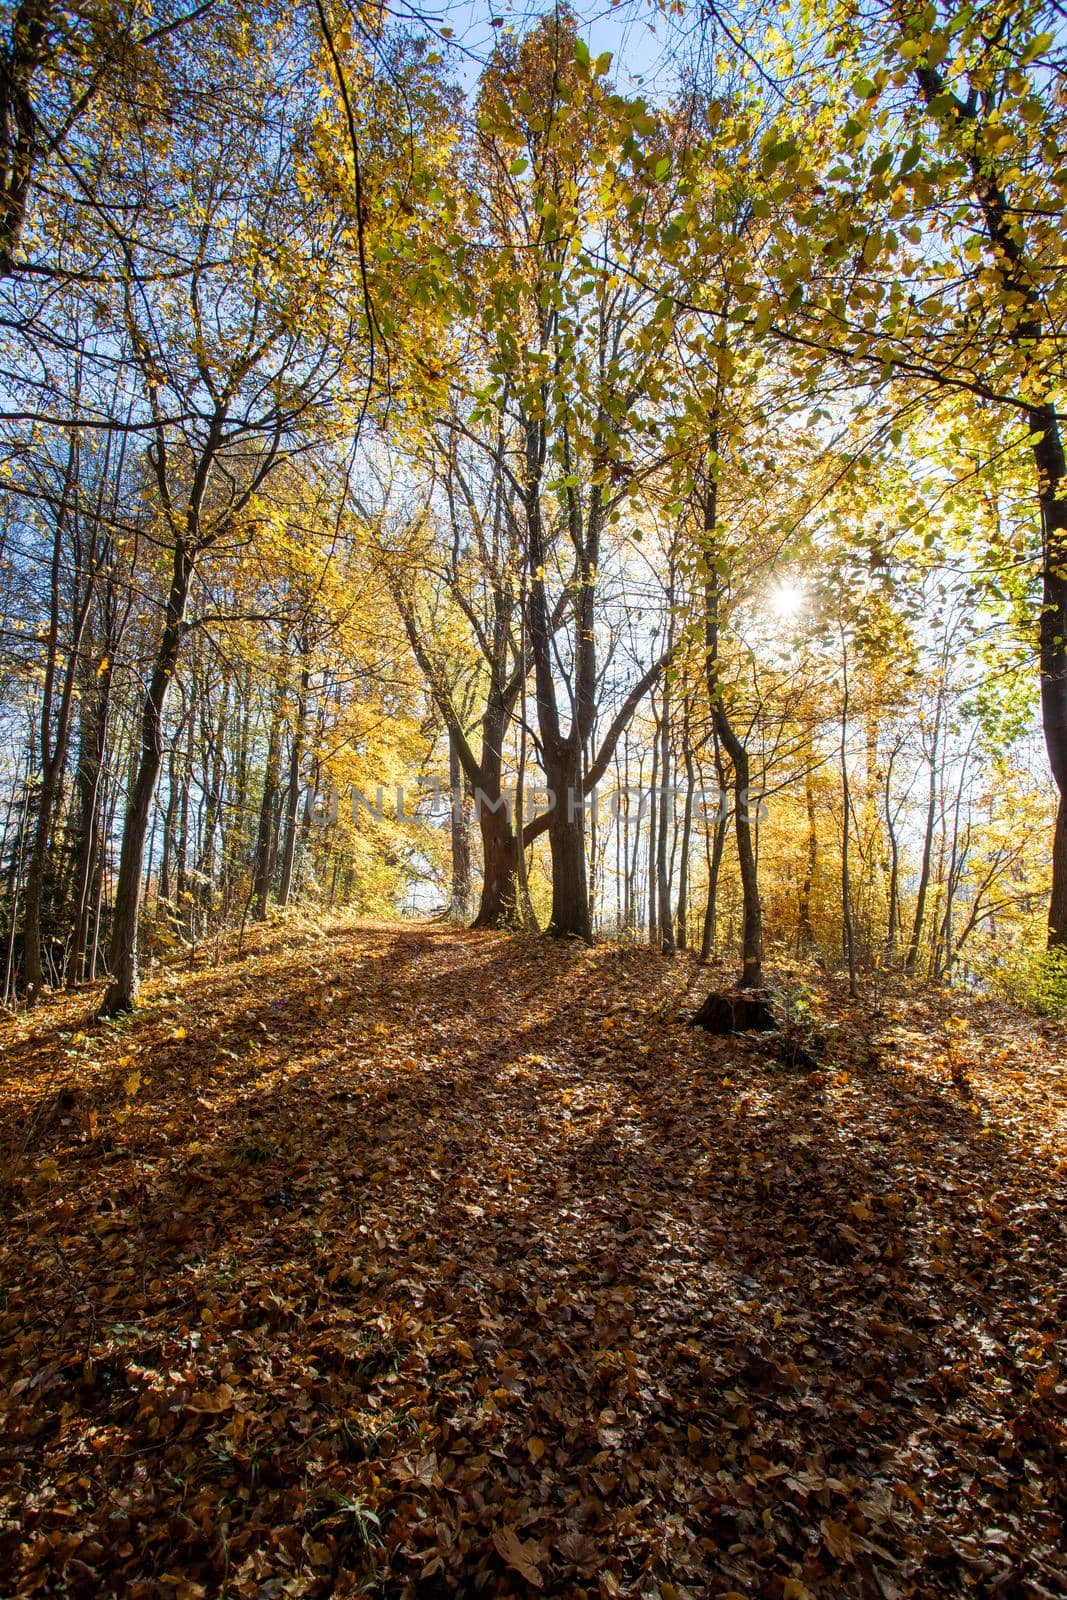 Forest landscape in autumn: Colorful leaves, sunbeams and positive atmosphere by Daxenbichler